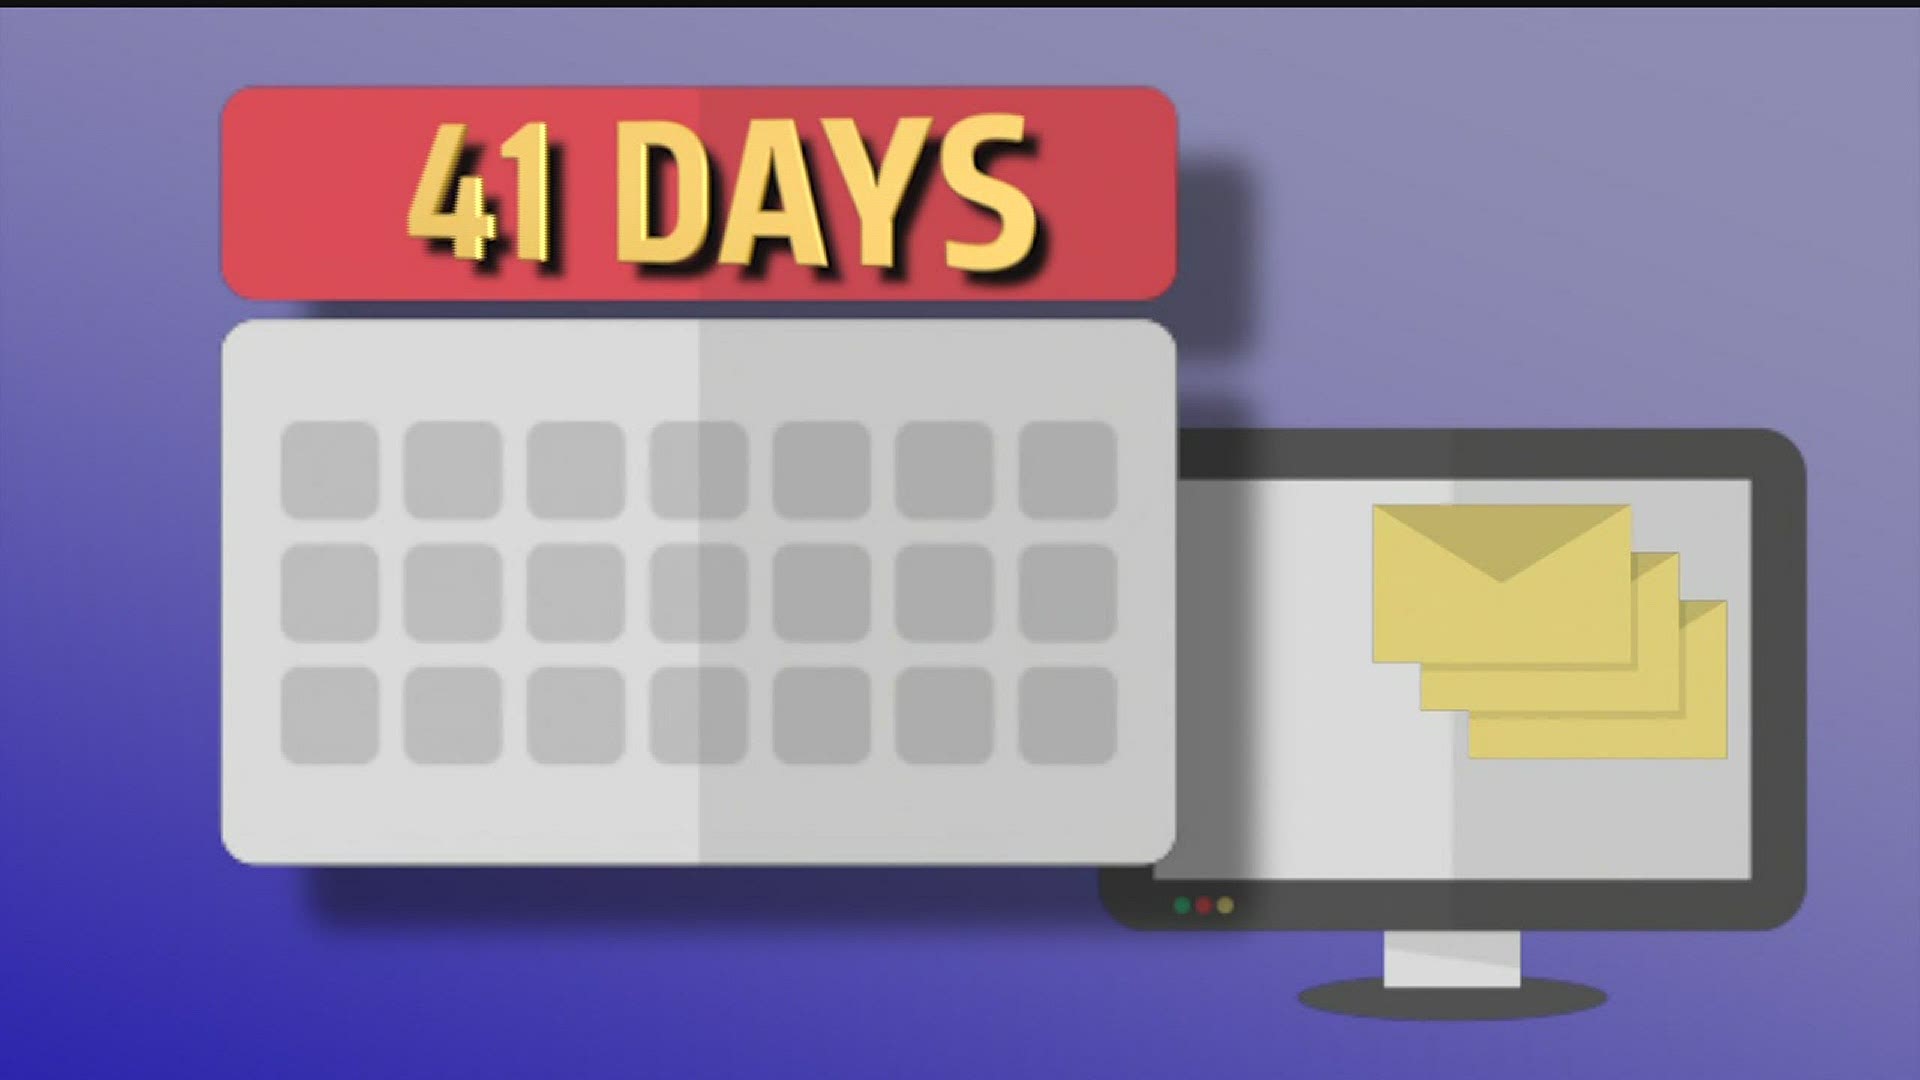 The Department of Labor and Industry says it takes 41 days to email responses regarding unemployment compensation claims.